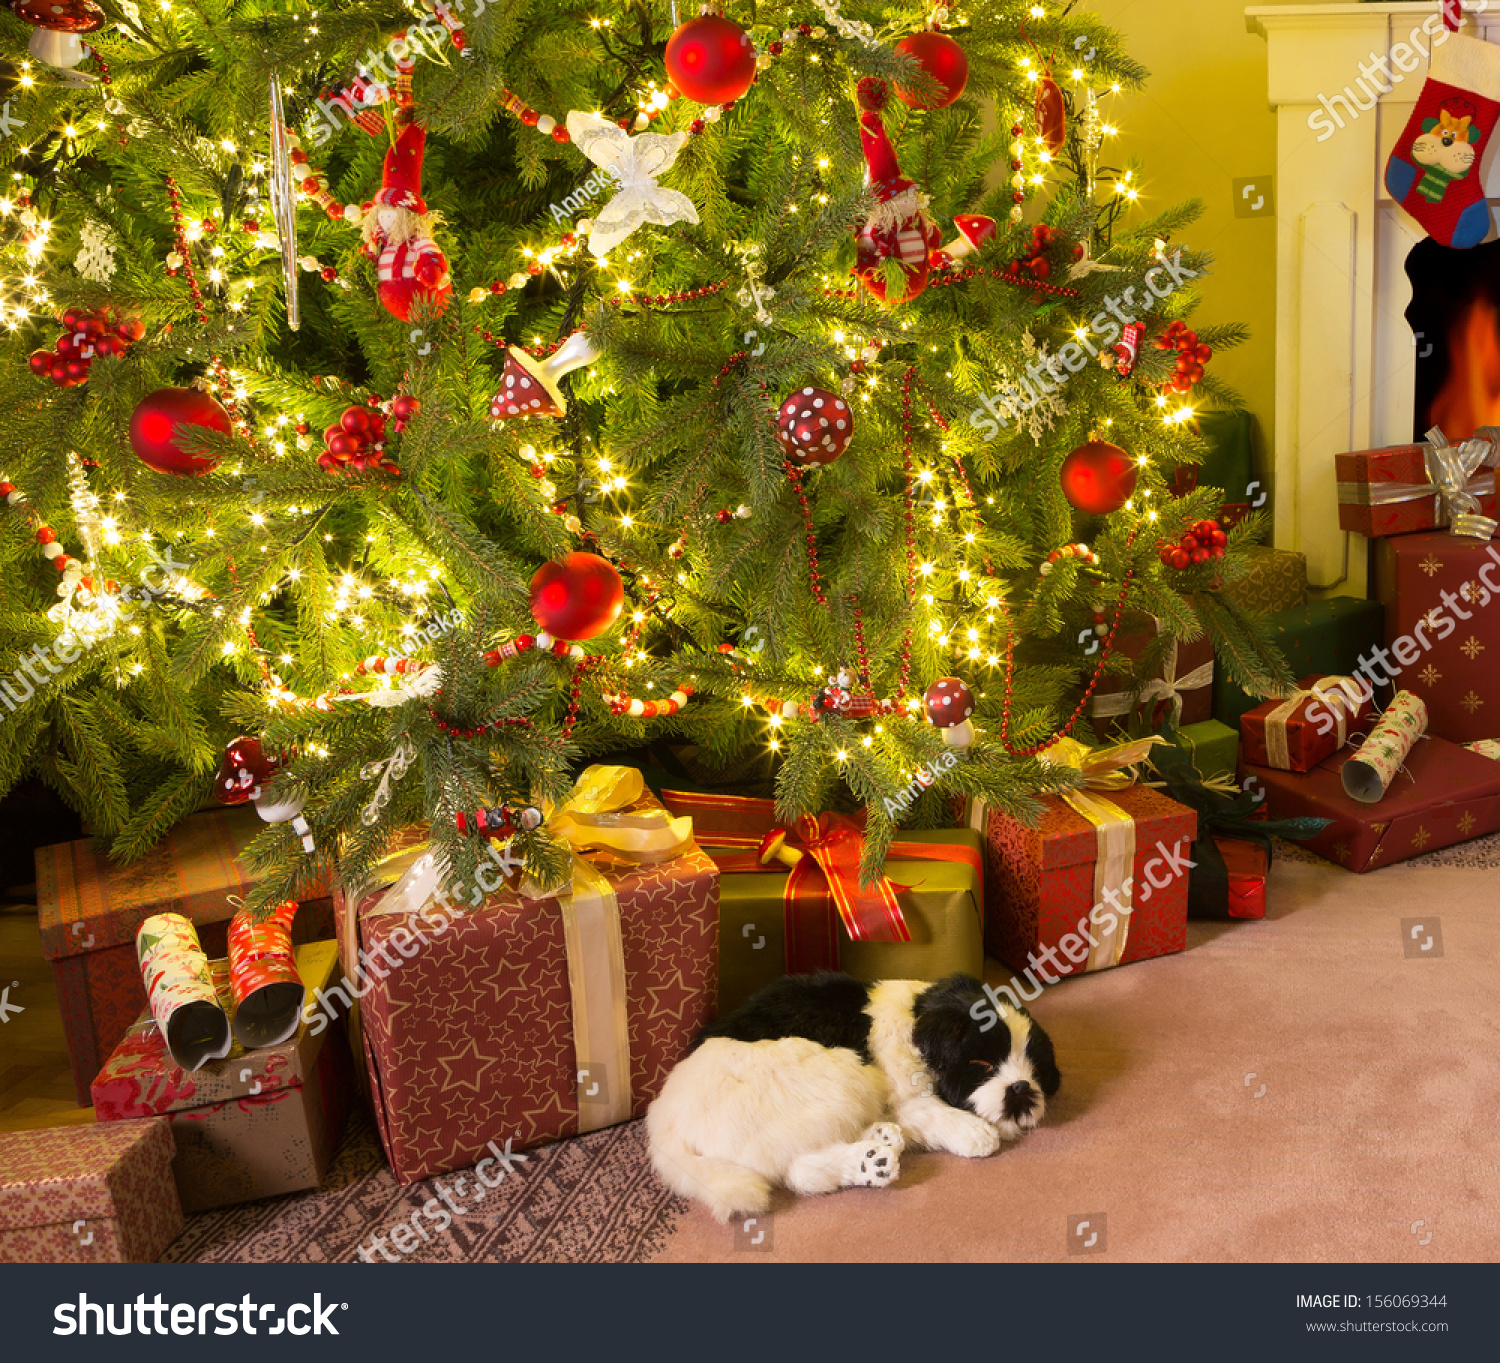 Colorful Presents And A Dog Under The Christmas Tree Stock Photo 156069344 : Shutterstock